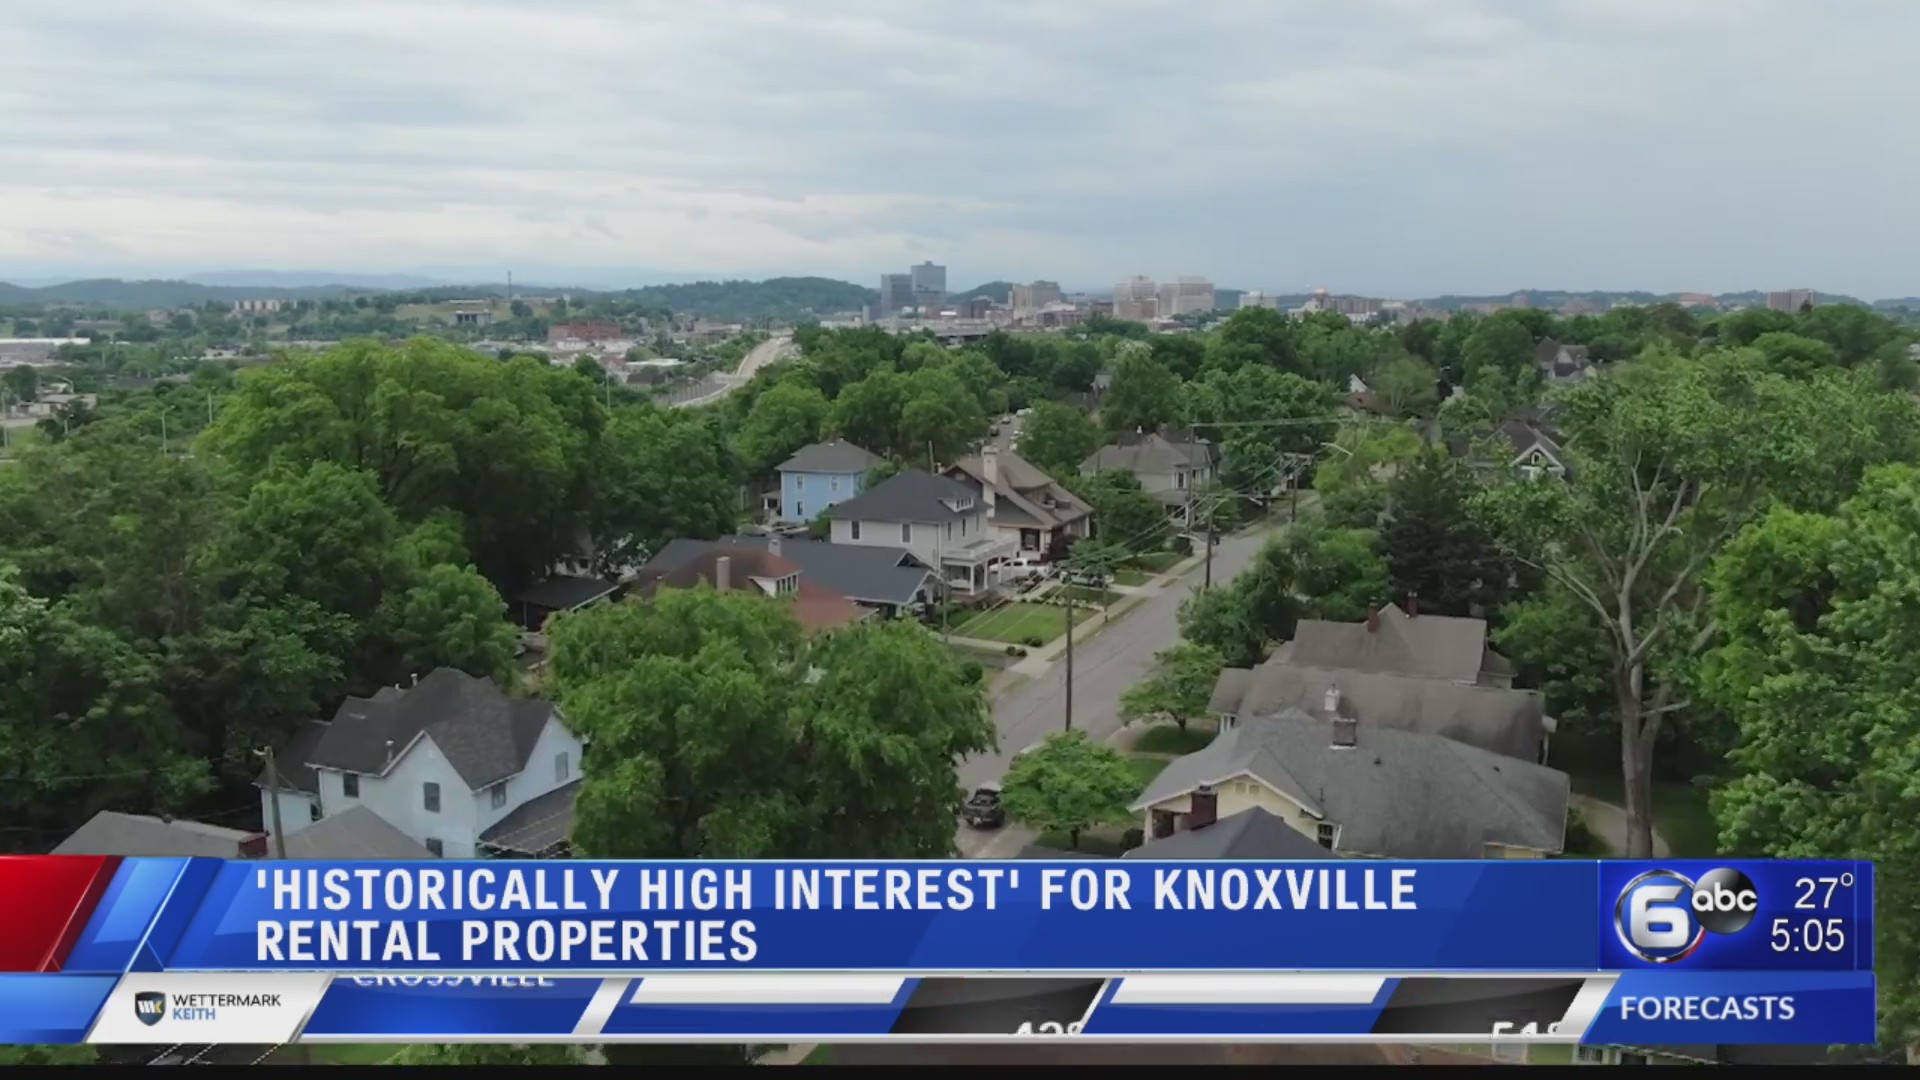 'Historically High Interest For Knoxville Rental Properties' Say Property Managers